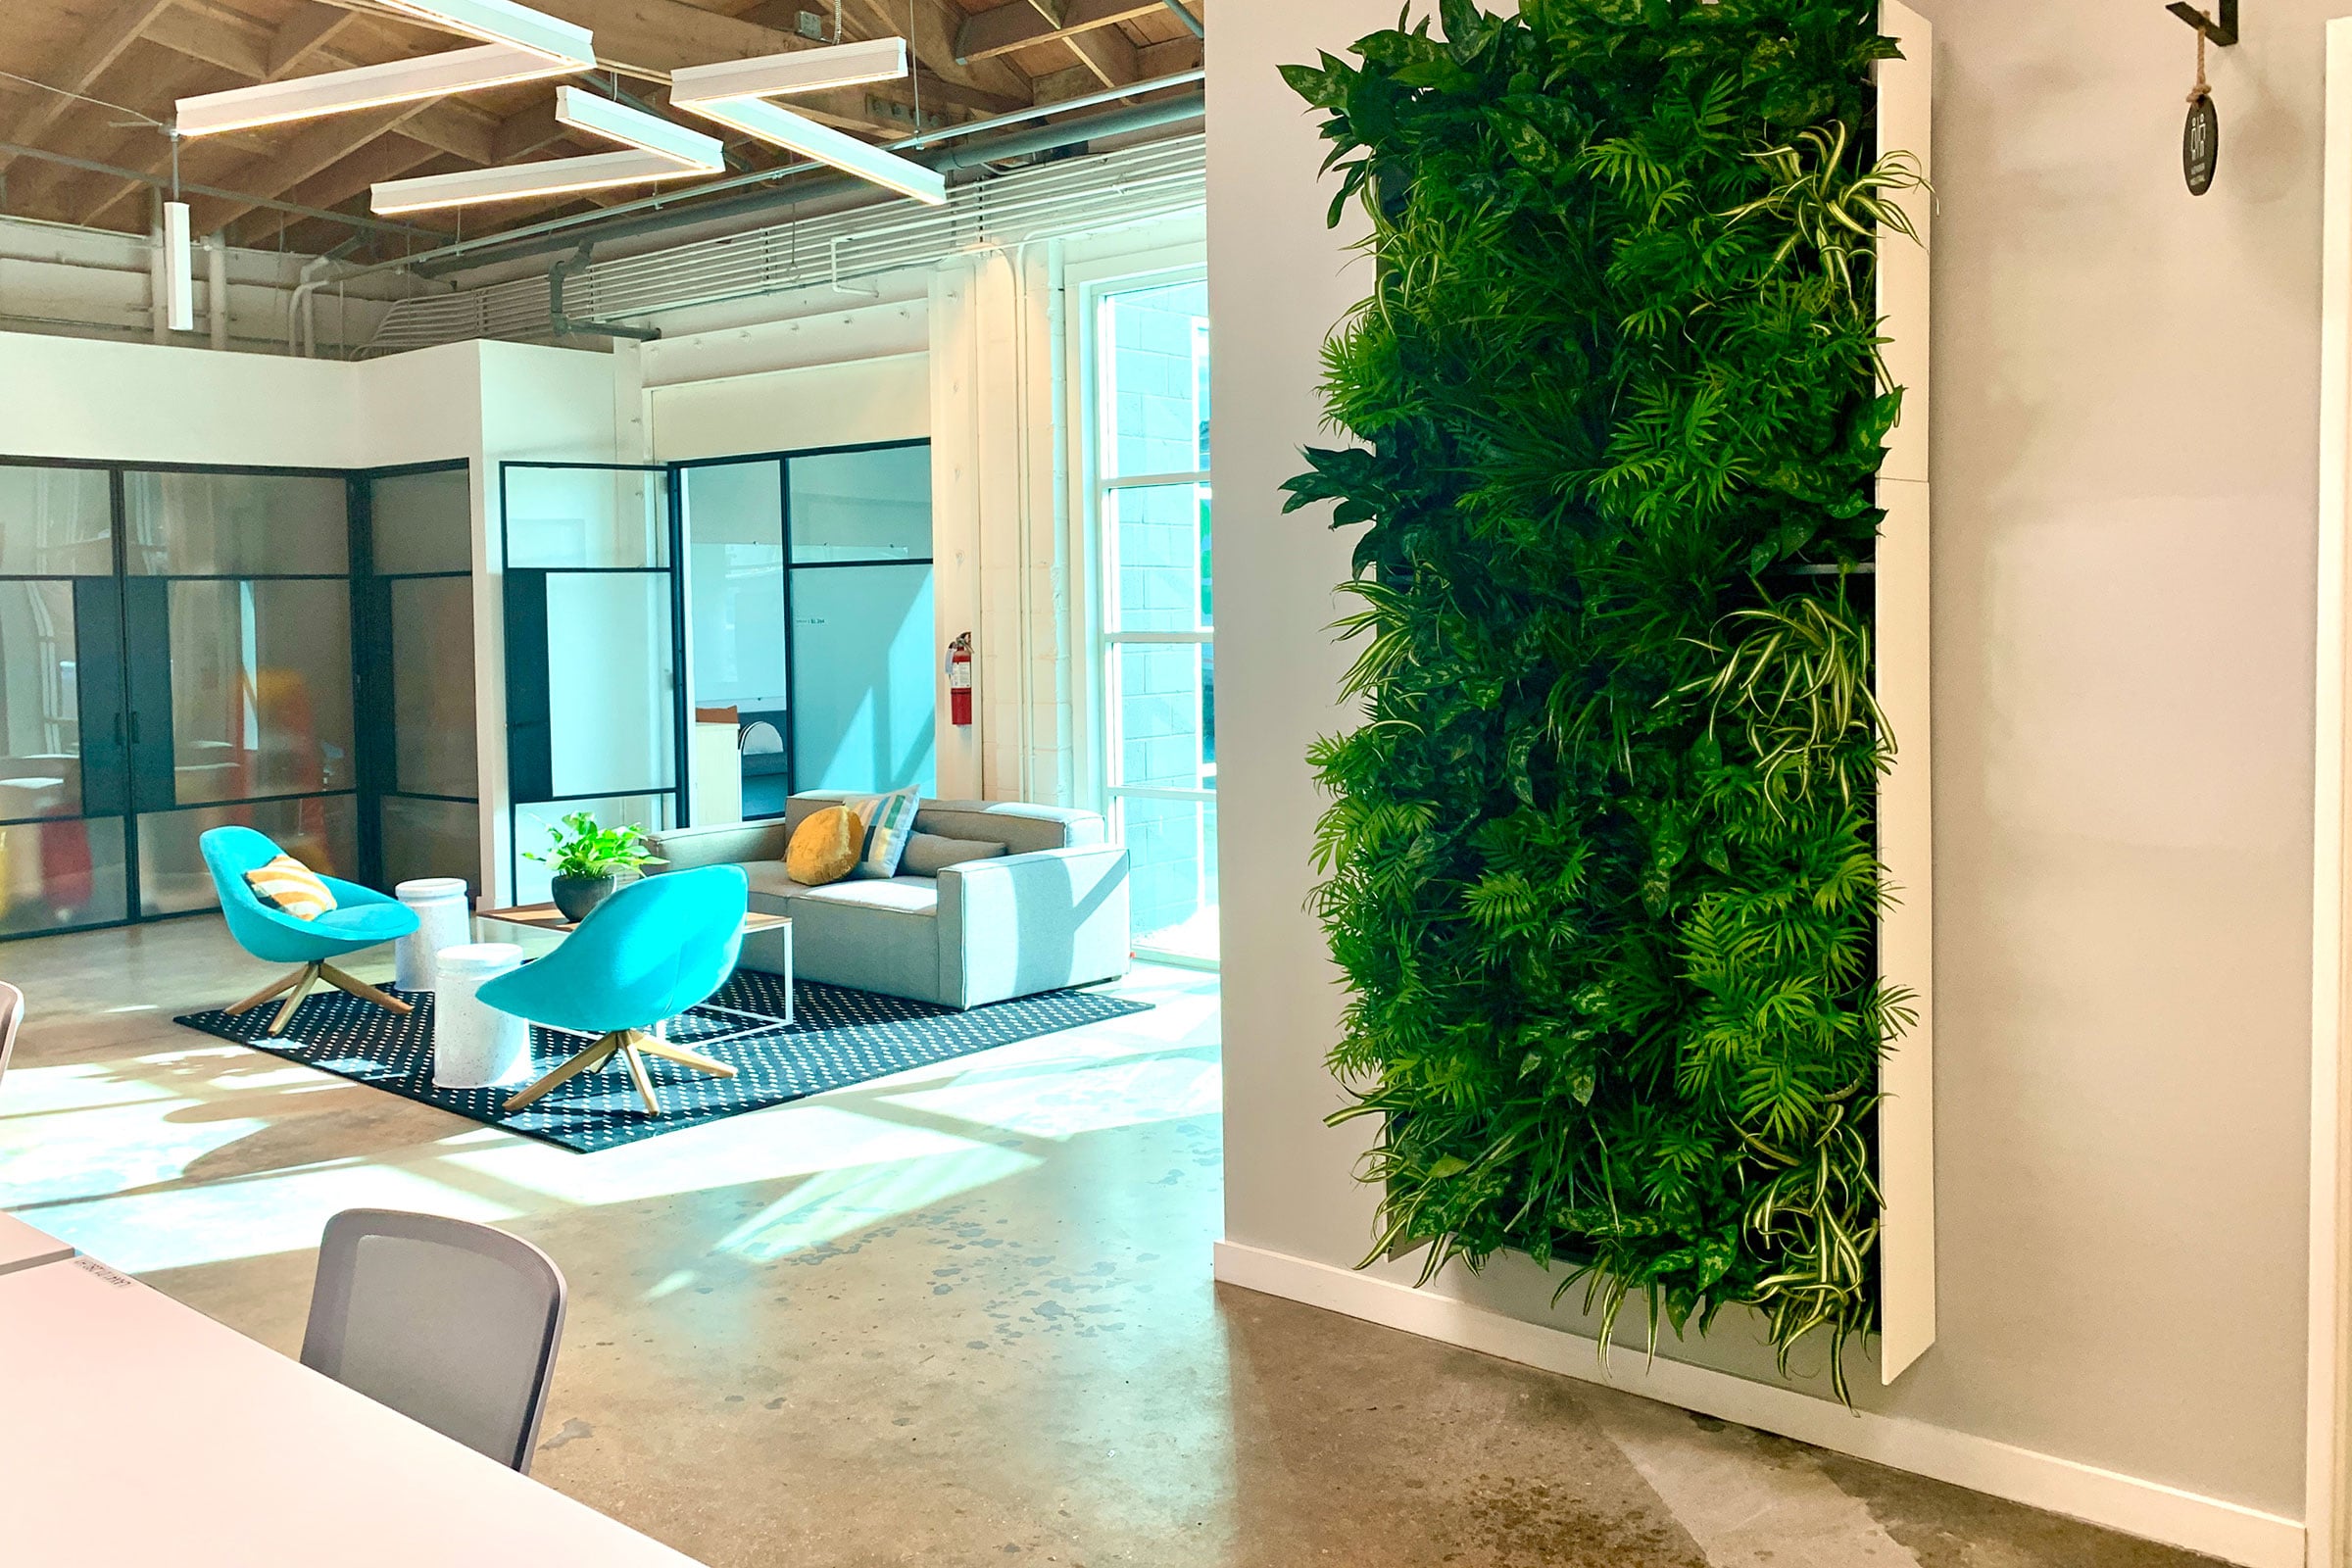 How Biophilic Design Makes for Better, Healthier Commercial Spaces